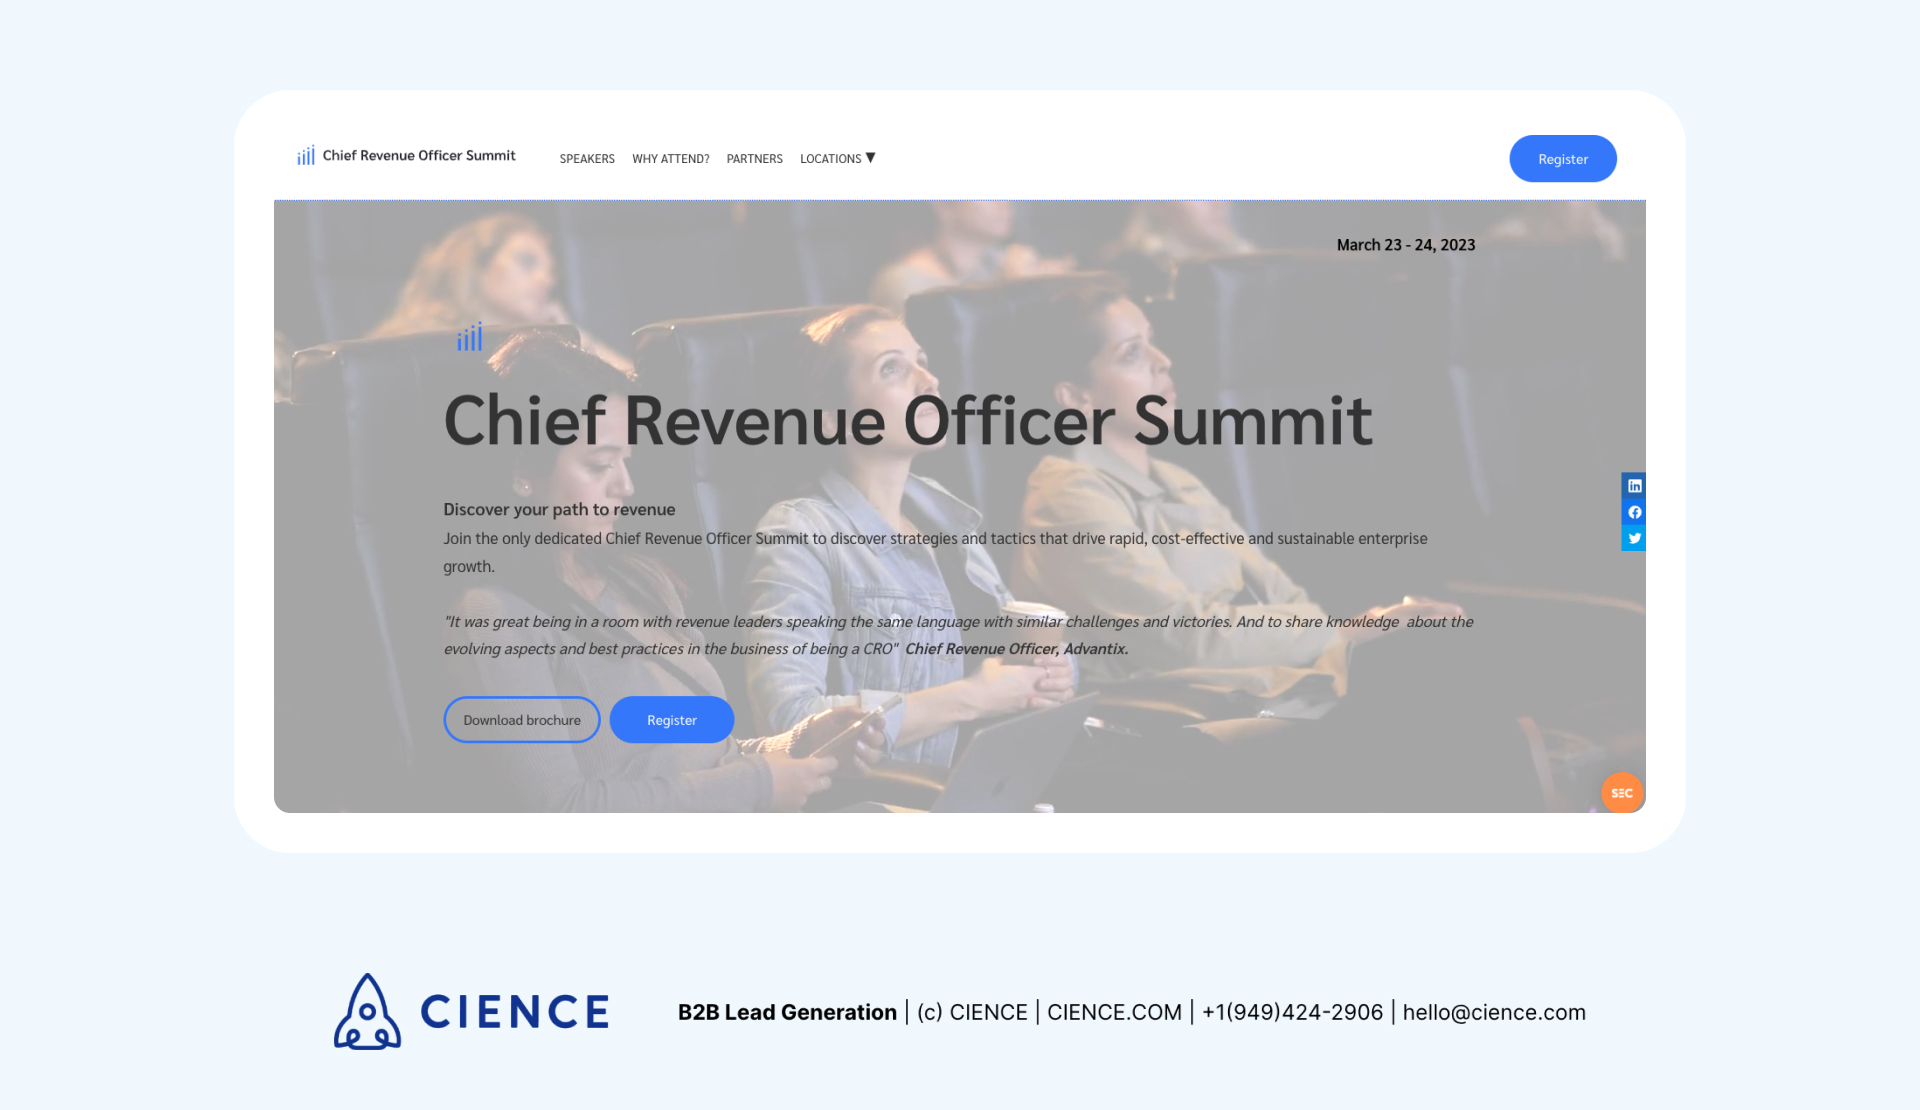 Sales conference 2023 - Chief Revenue Officer Summit